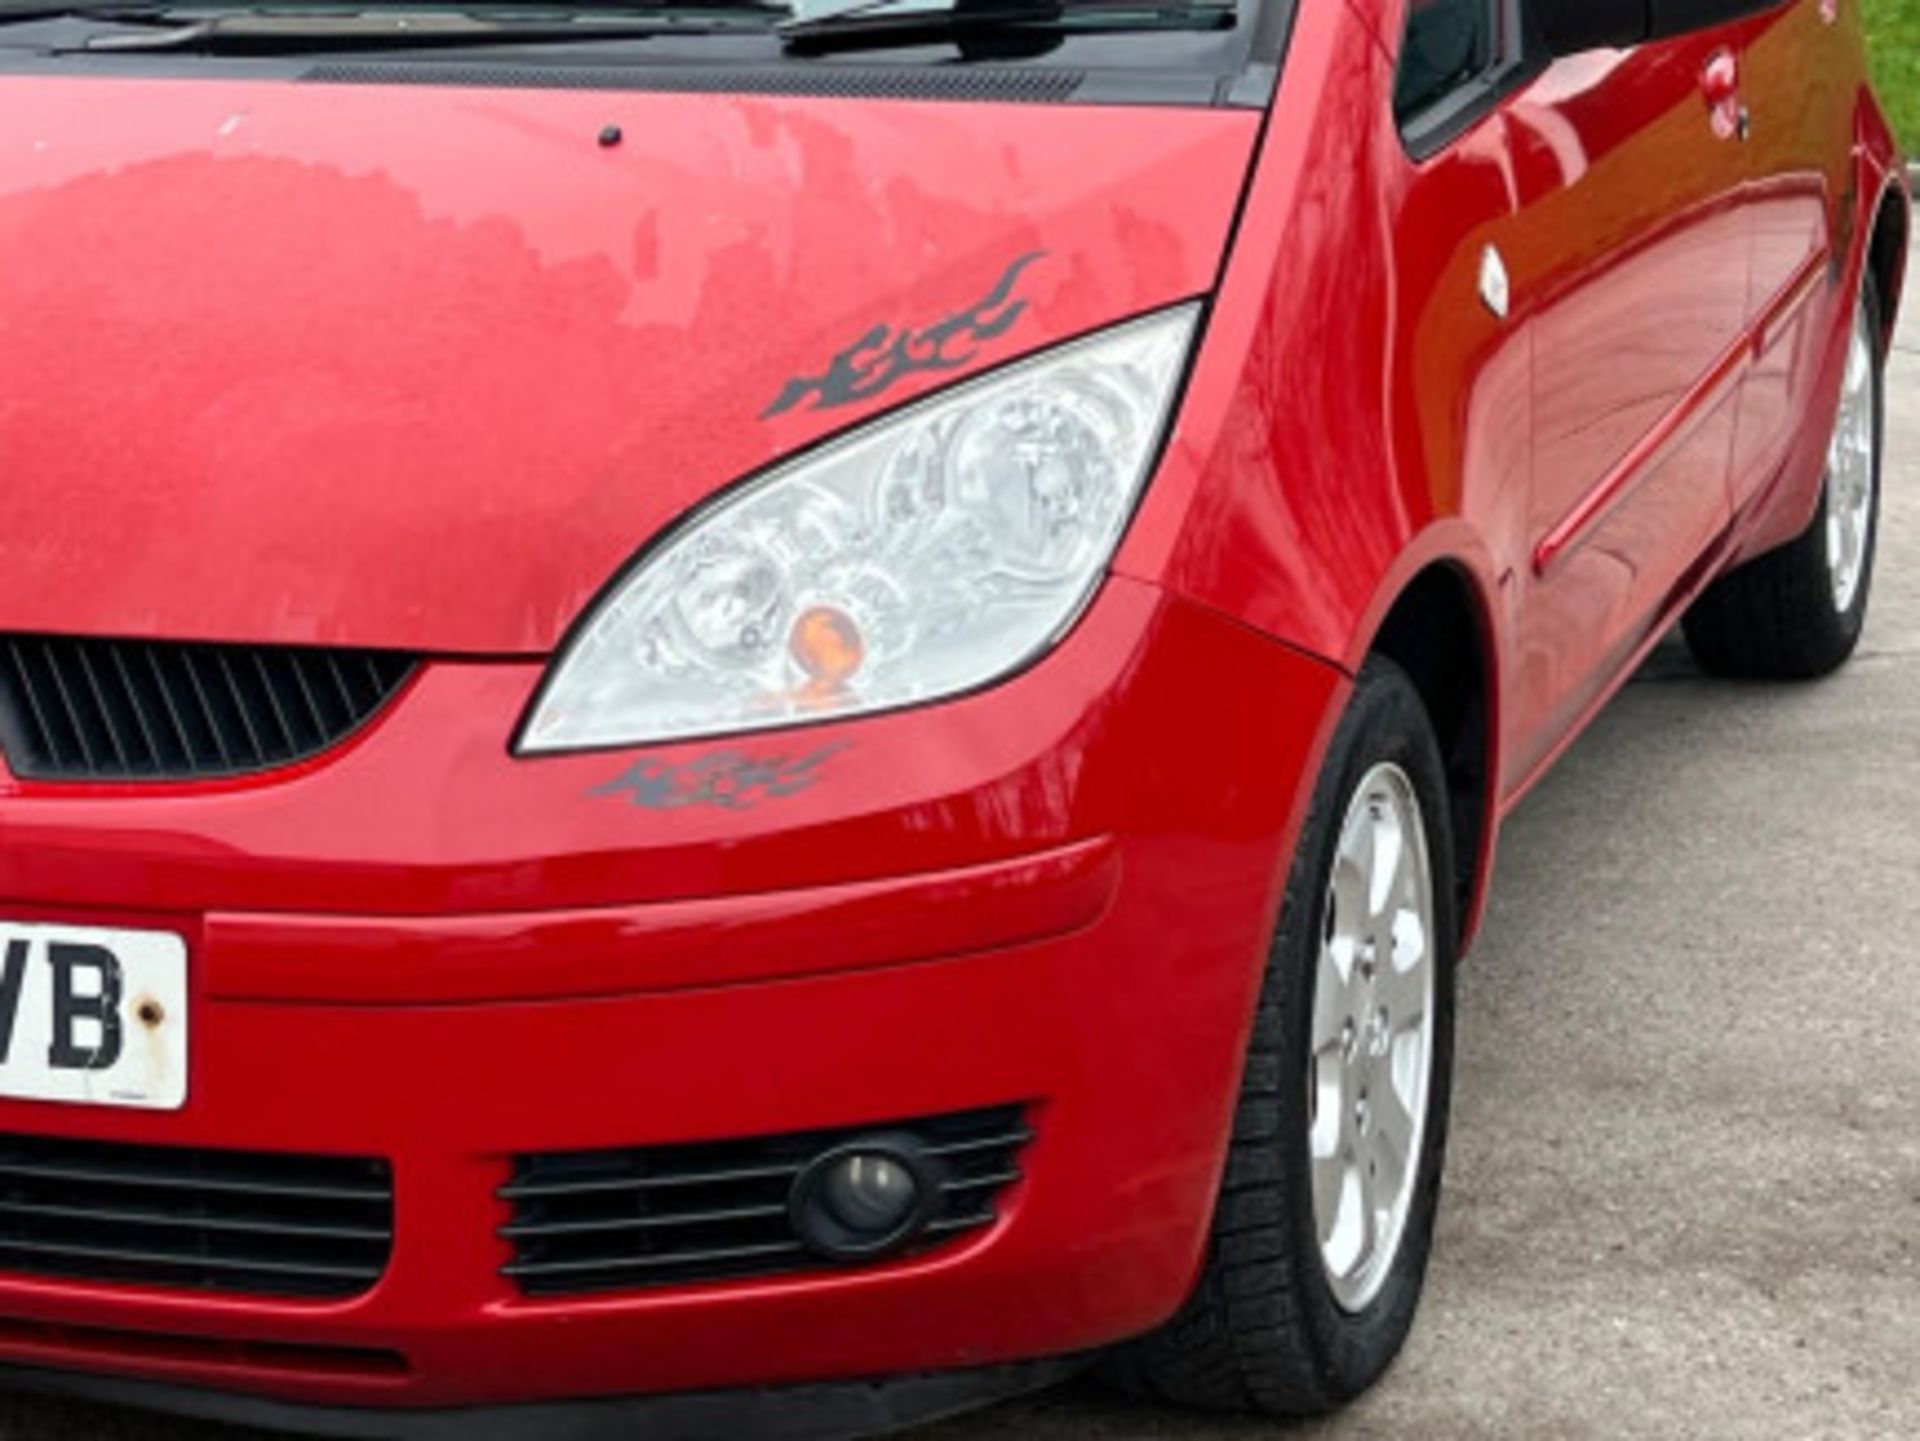 2007 MITSUBISHI COLT 1.5 DI-D DIESEL AUTOMATIC >>--NO VAT ON HAMMER--<< - Image 49 of 127